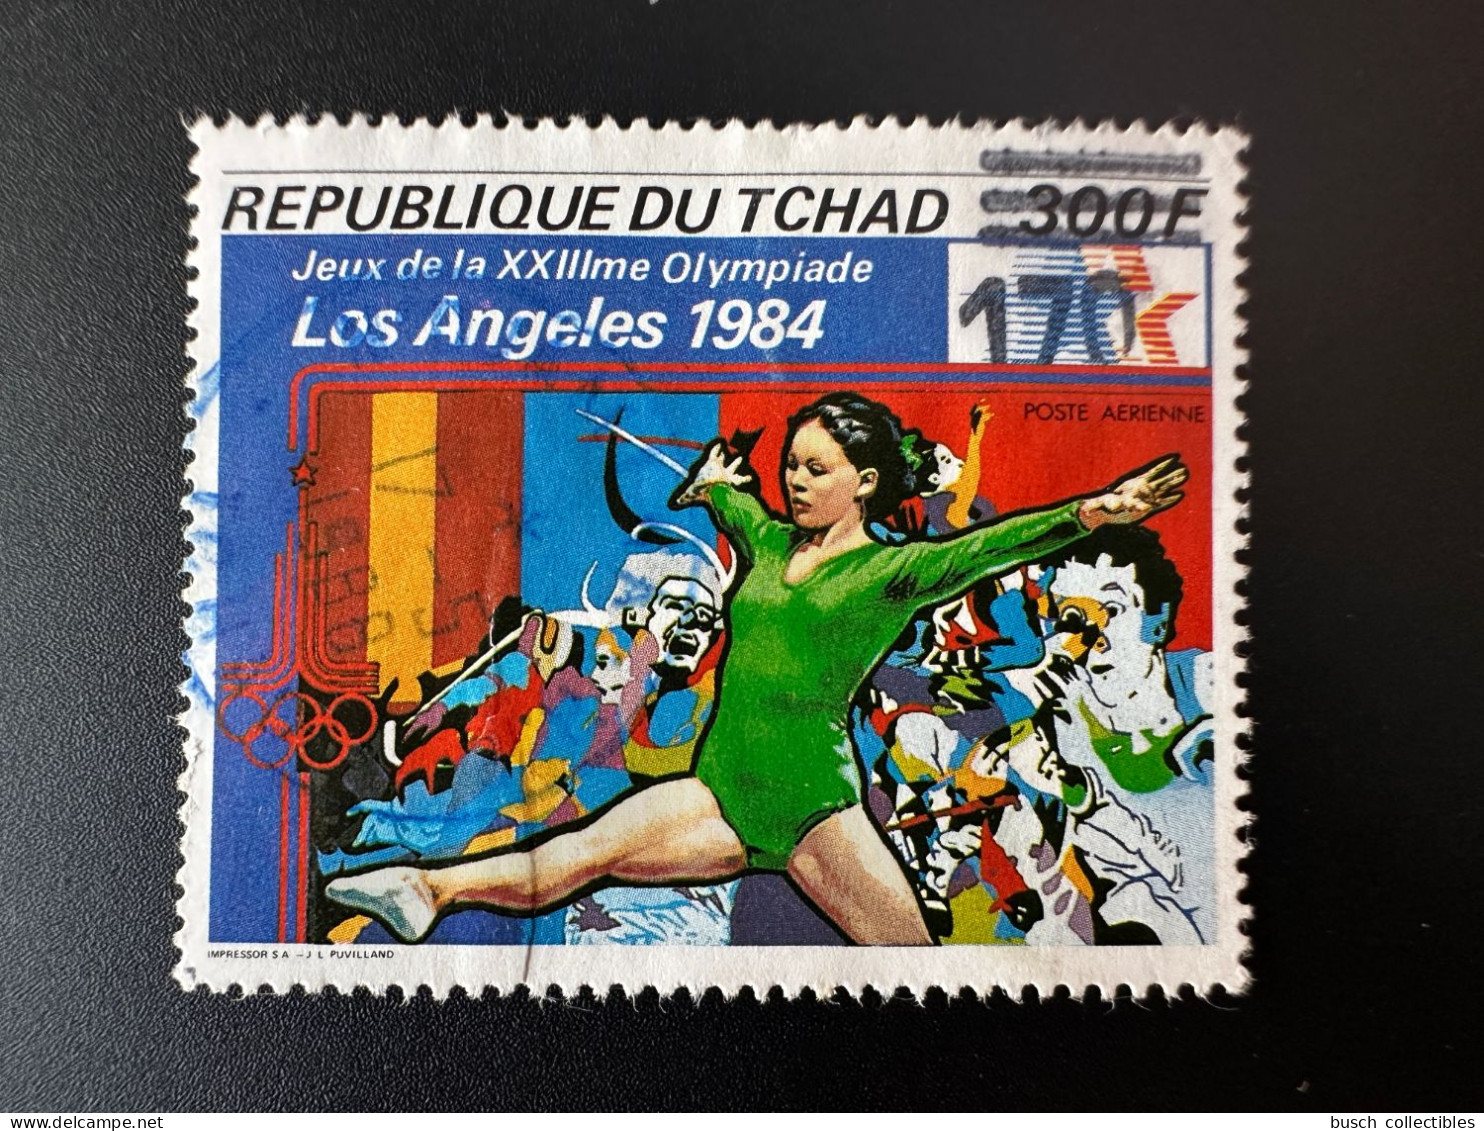 Tchad Chad Tschad 1987 / 1988 Mi. 1149 Oblitéré Used Surchargé Overprint Olympic Games Jeux Olympiques Los Angeles 1984 - Tchad (1960-...)